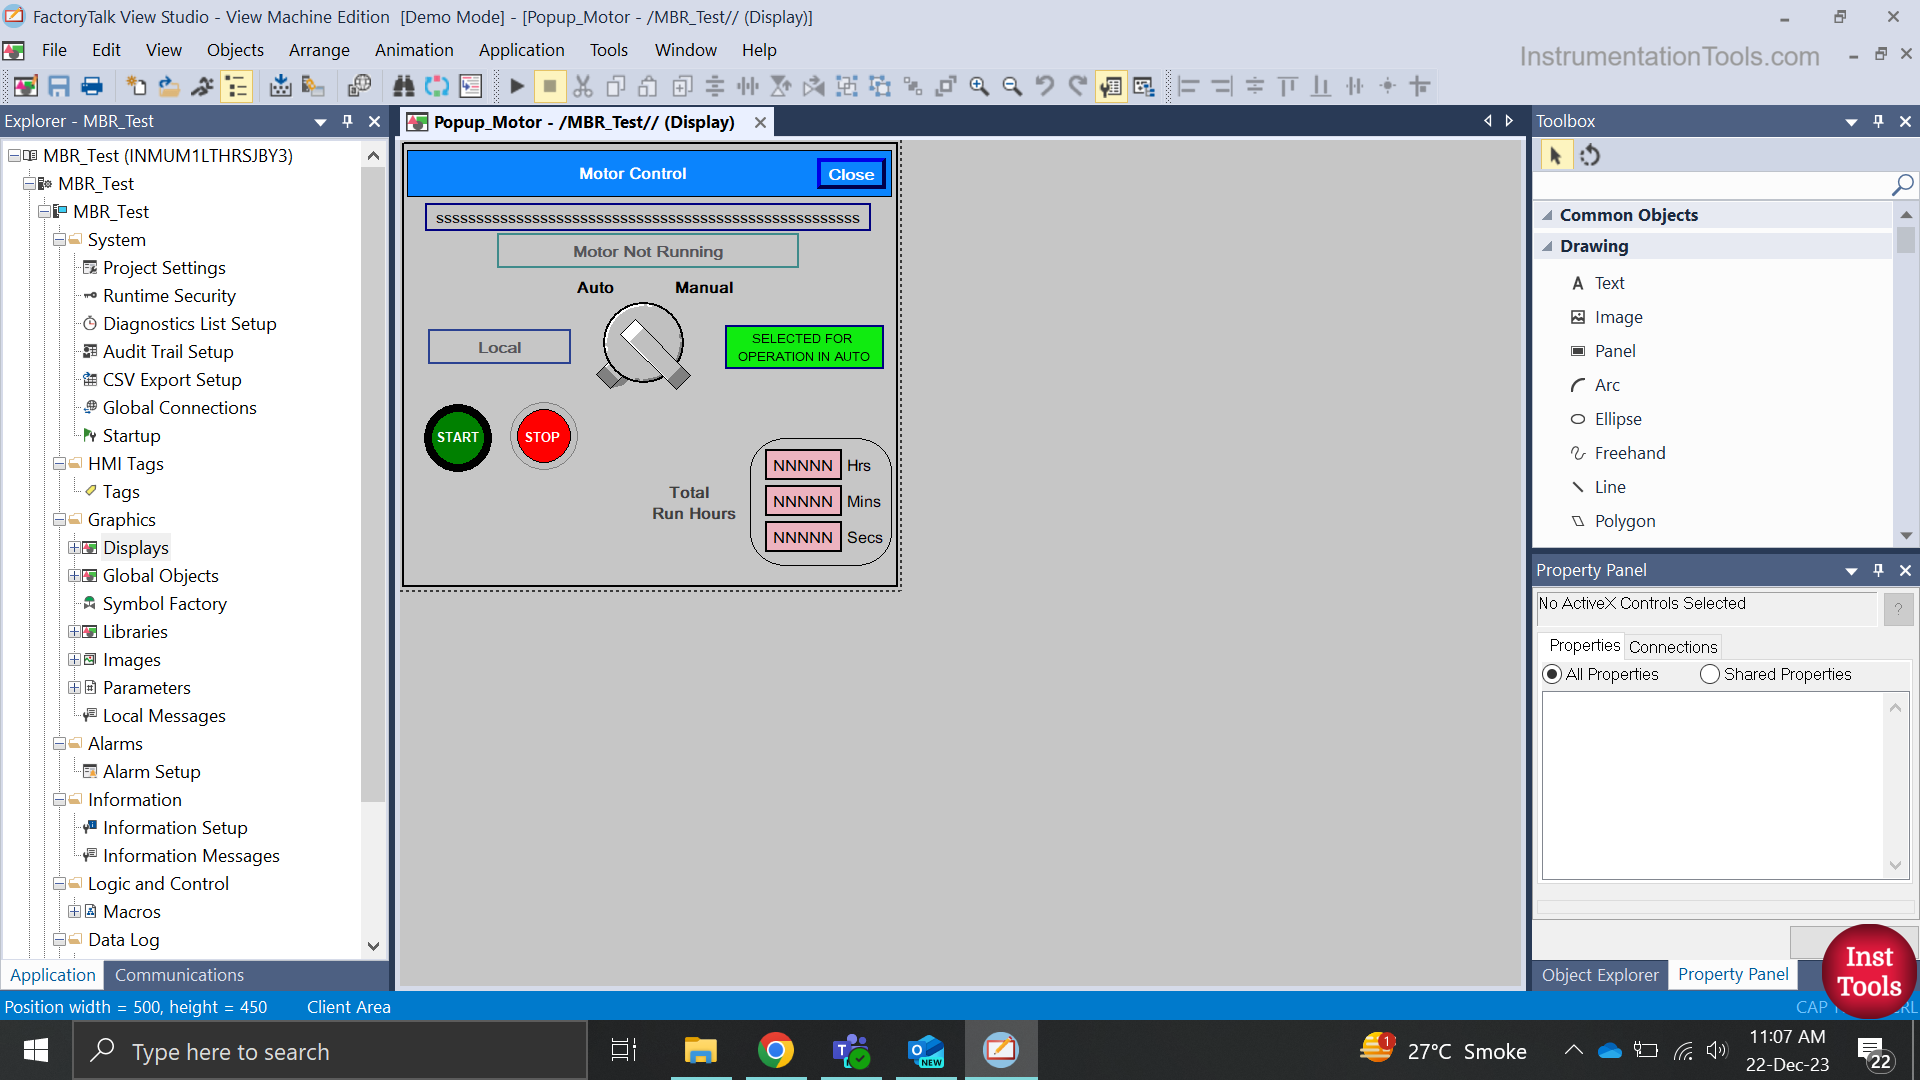 How to Create Faceplate in FactoryTalk View Studio